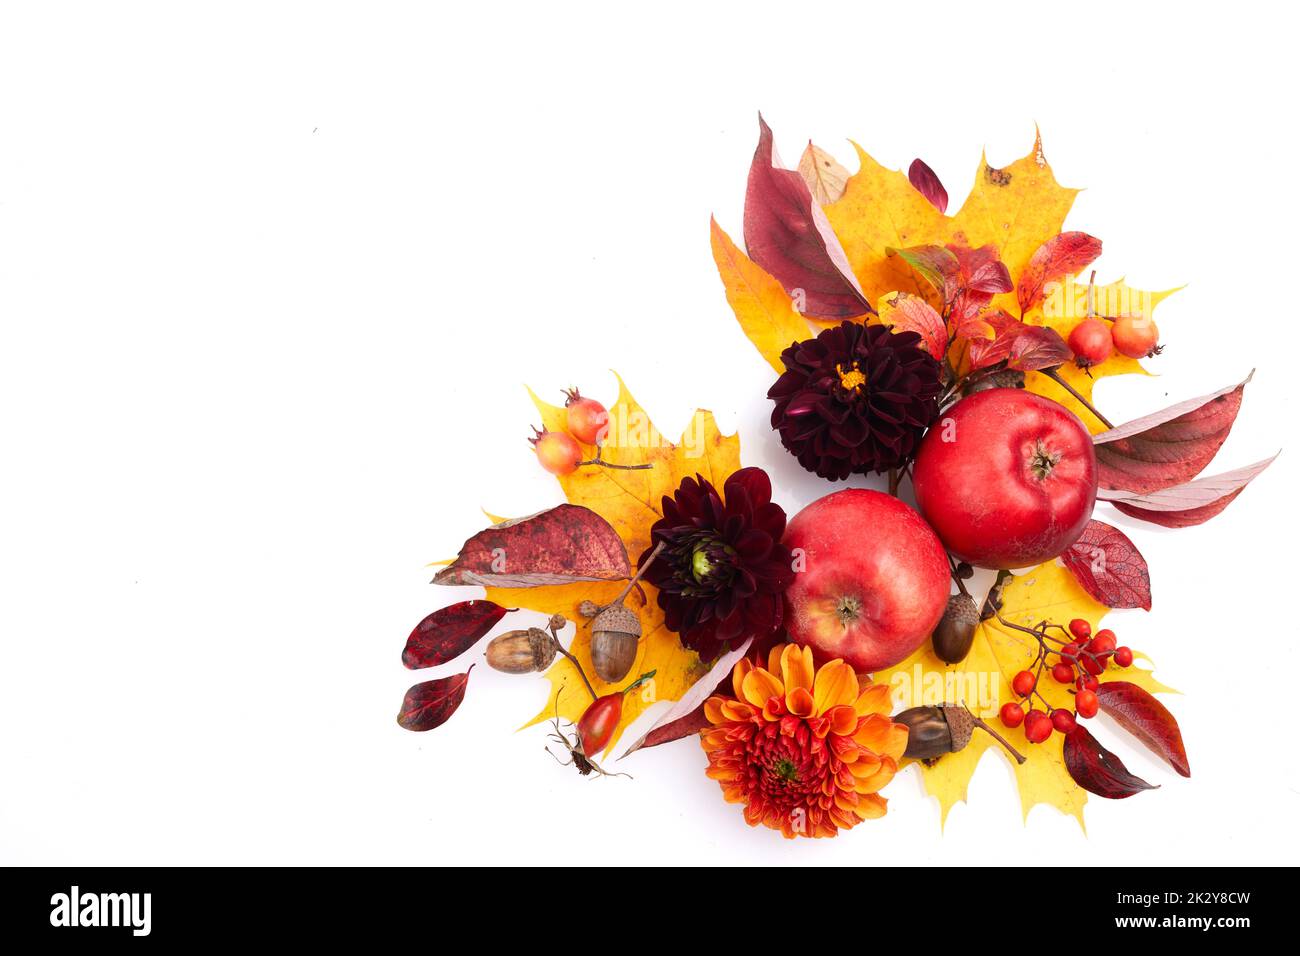 Composition of colorful fruits, berries, cones. Top view on white background. Autumn flat lay. Stock Photo